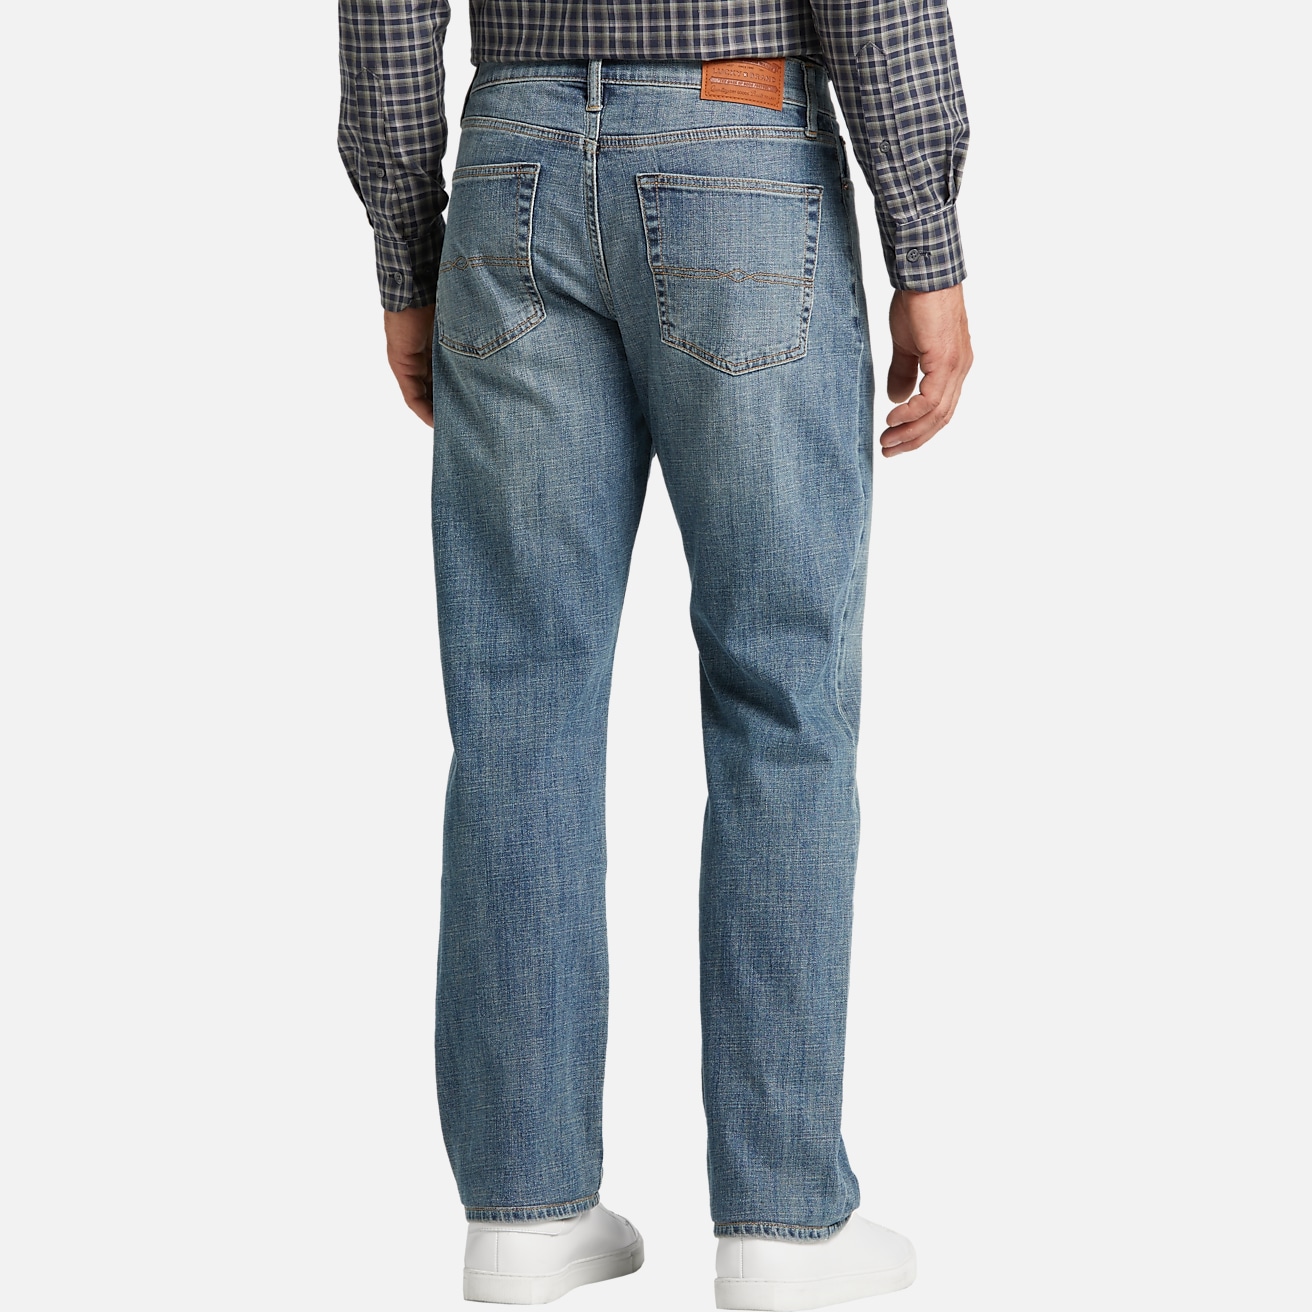 https://image.menswearhouse.com/is/image/TMW/TMW_22ZC_53_LUCKY_BRAND_JEANS_DARK_WASH_ALT1?imPolicy=pdp-mob-2x